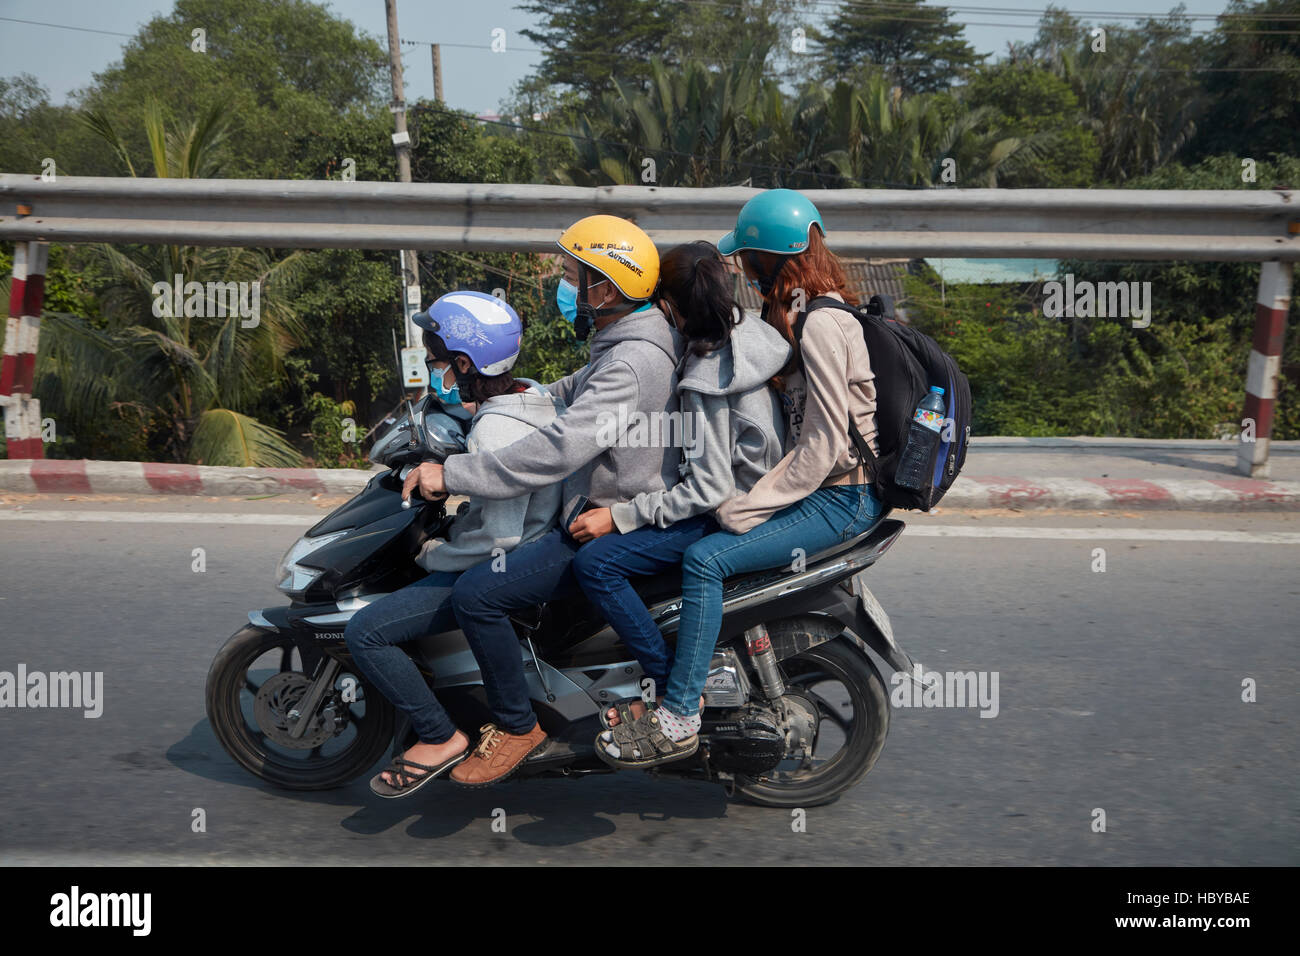 Familiy of four on overloaded scooter, Ho Chi Minh City (Saigon), Vietnam Stock Photo